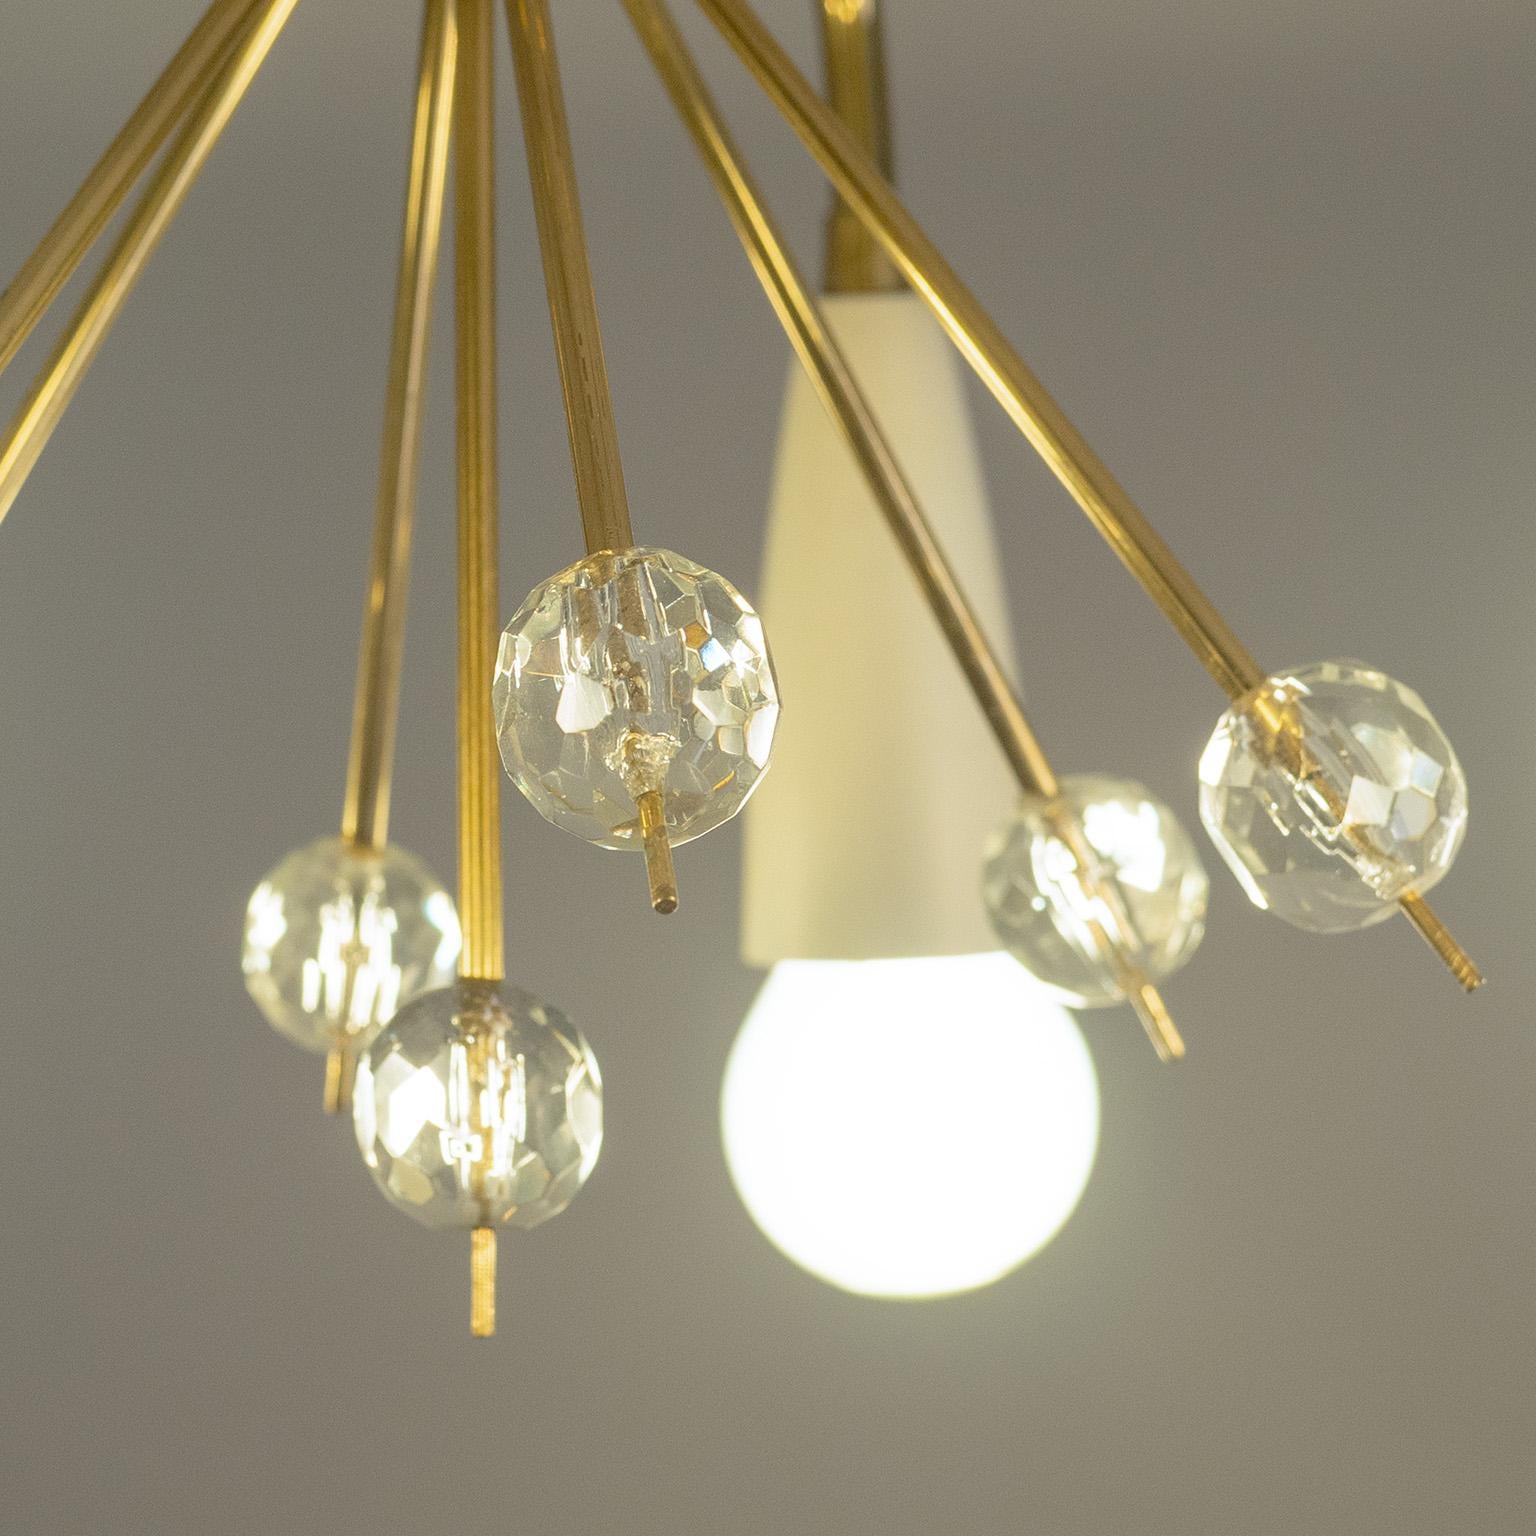 Mid-20th Century Pair of Austrian Brass and Crystal Ceiling Lights, 1950s